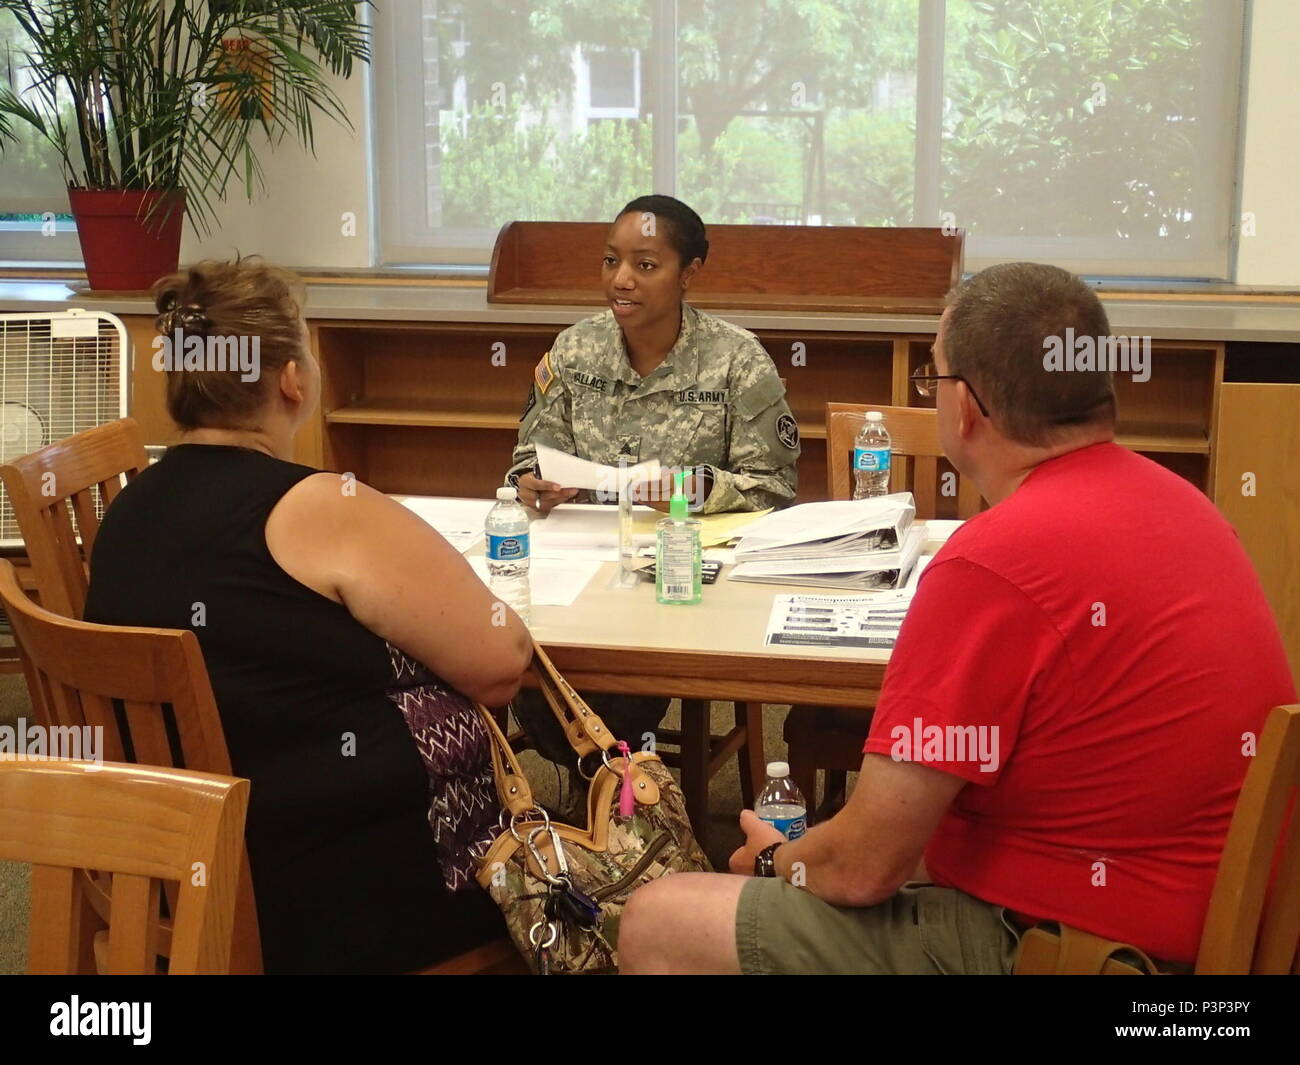 Sgt. Brittany Wallace, a healthcare specialist with Company Alpha, 48th Combat Support Hospital out of Fort Story, Va., provides patients information on continuing care during Greater Chenango Cares, July 24, 2016.  Greater Chenango Cares is one of the Innovative Readiness Training events which provides real-world training in a joint civil-military environment while delivering world-class, no-cost medical, dental, optometry and veterinary care to the people of Chenango County, N.Y., from July 15-24. Stock Photo